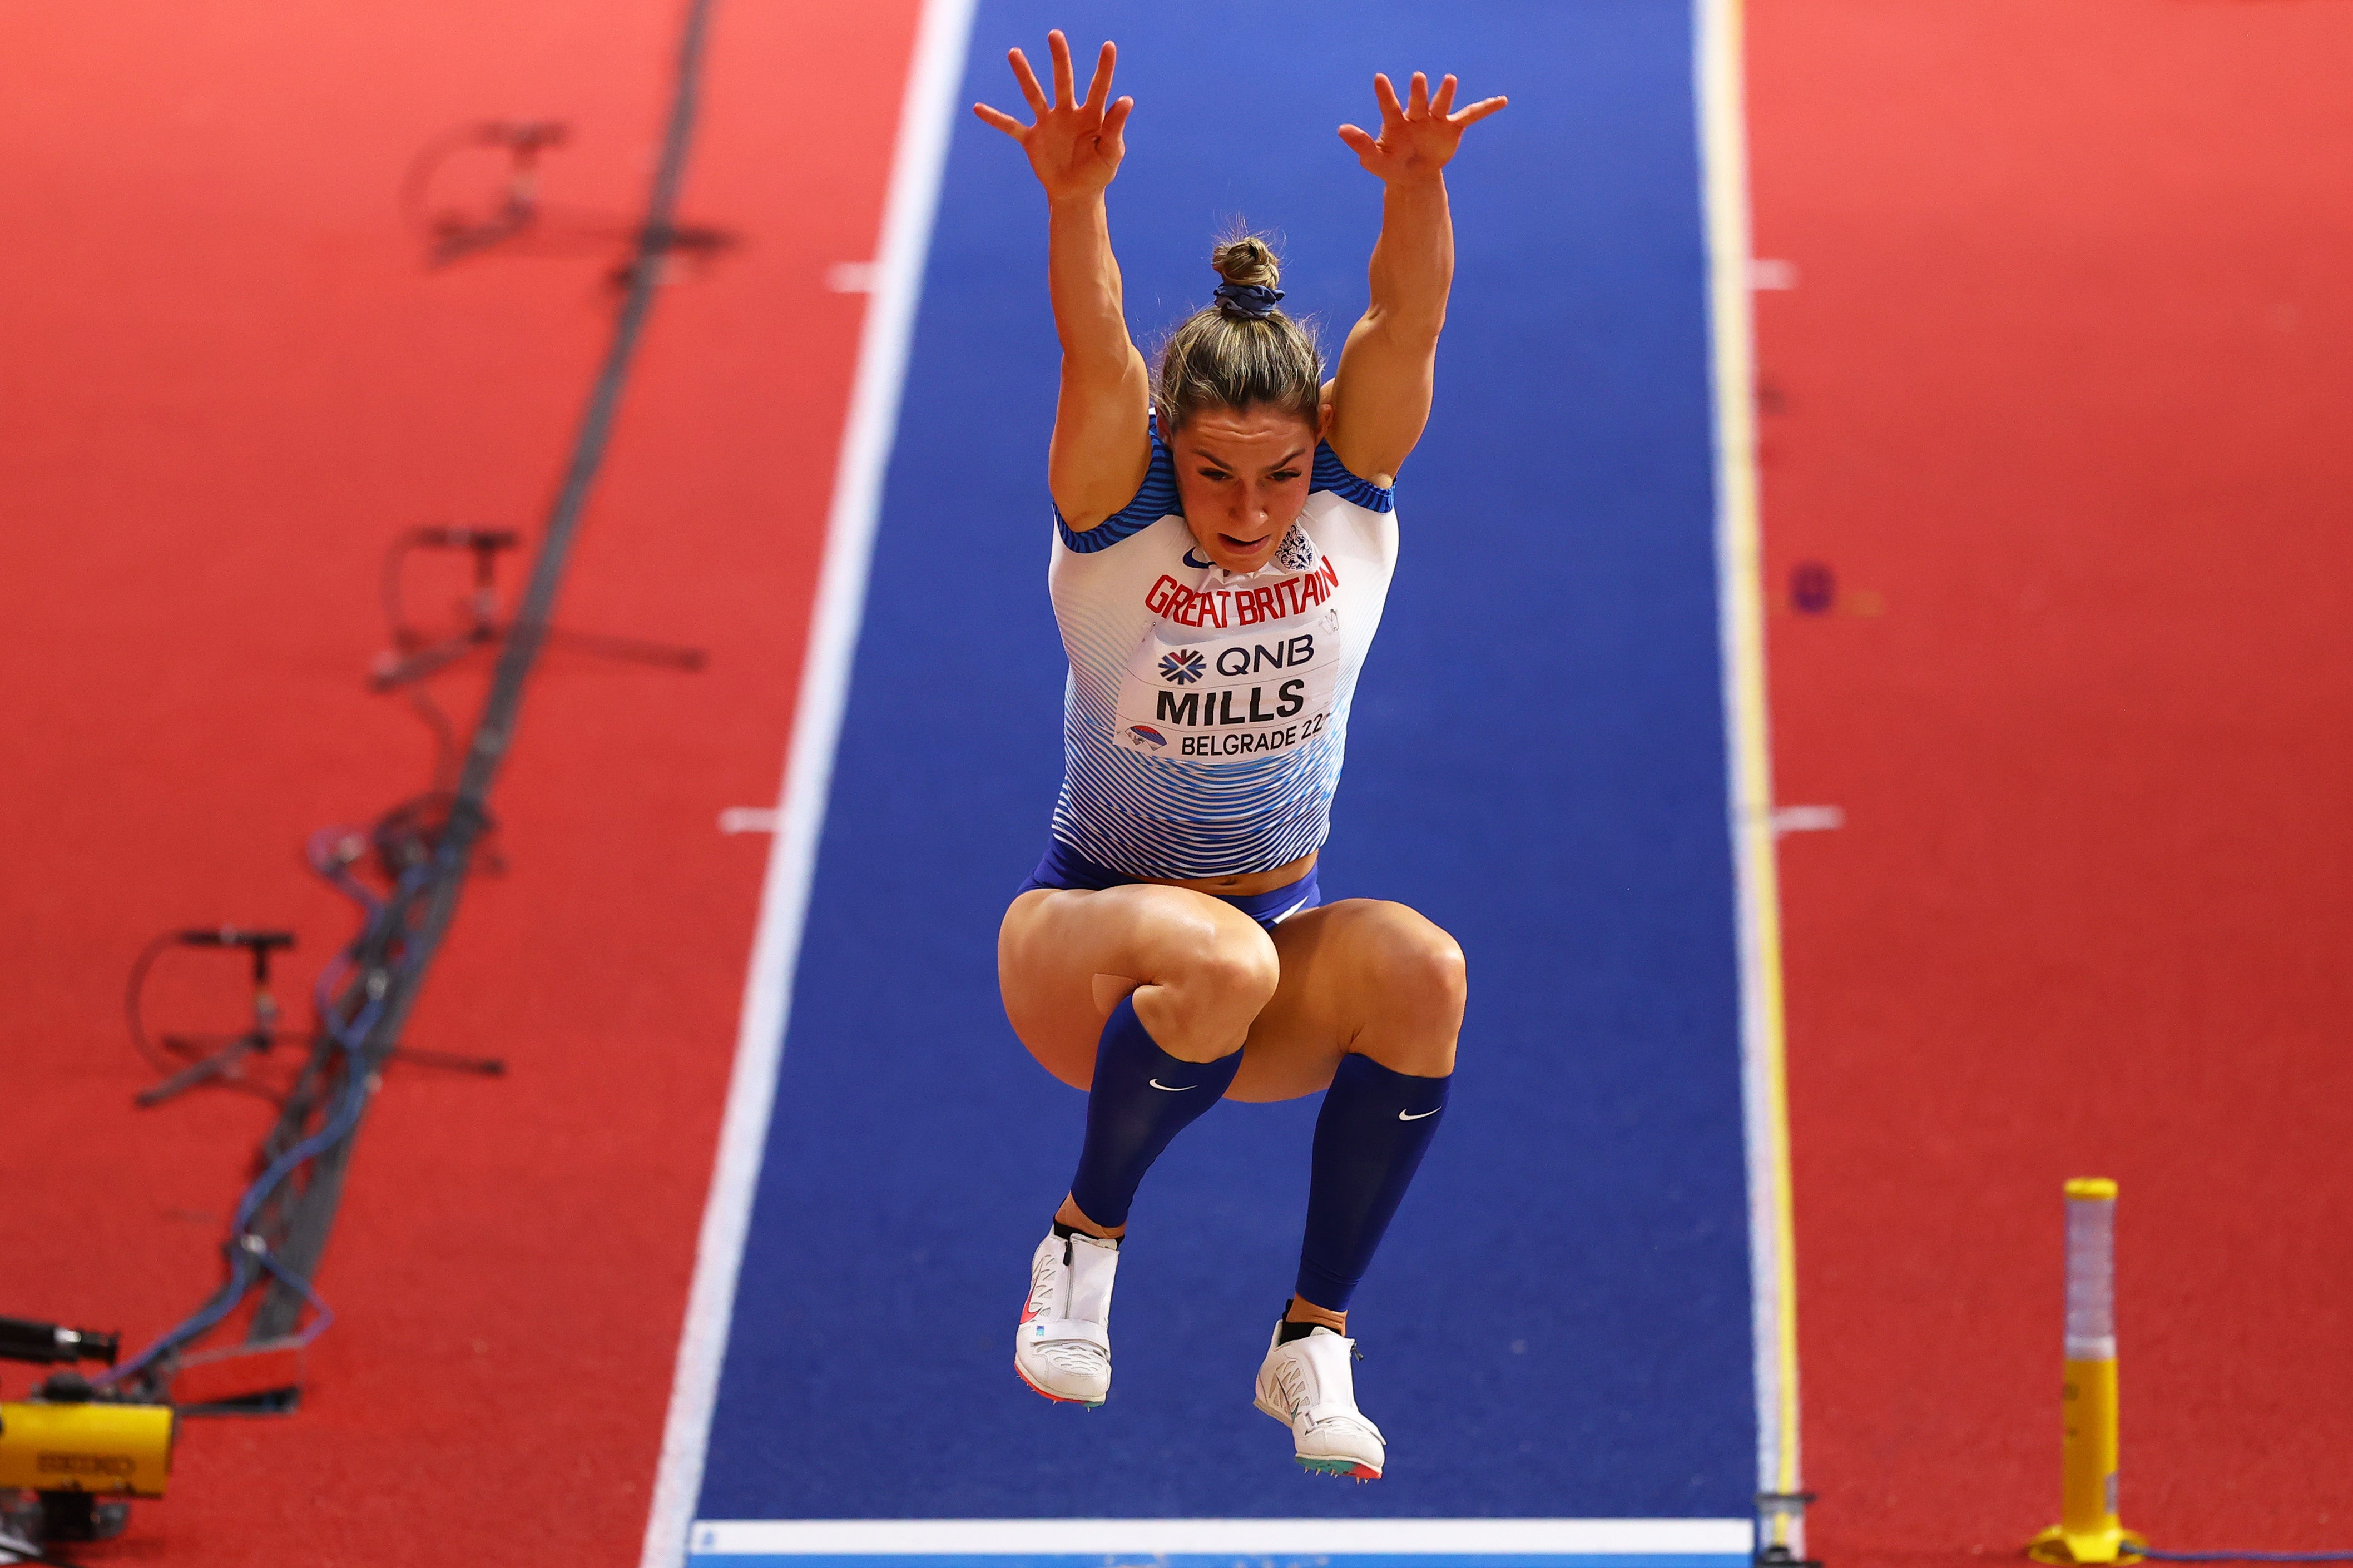 Holly Mills competes in the pentathlon for Great Britain